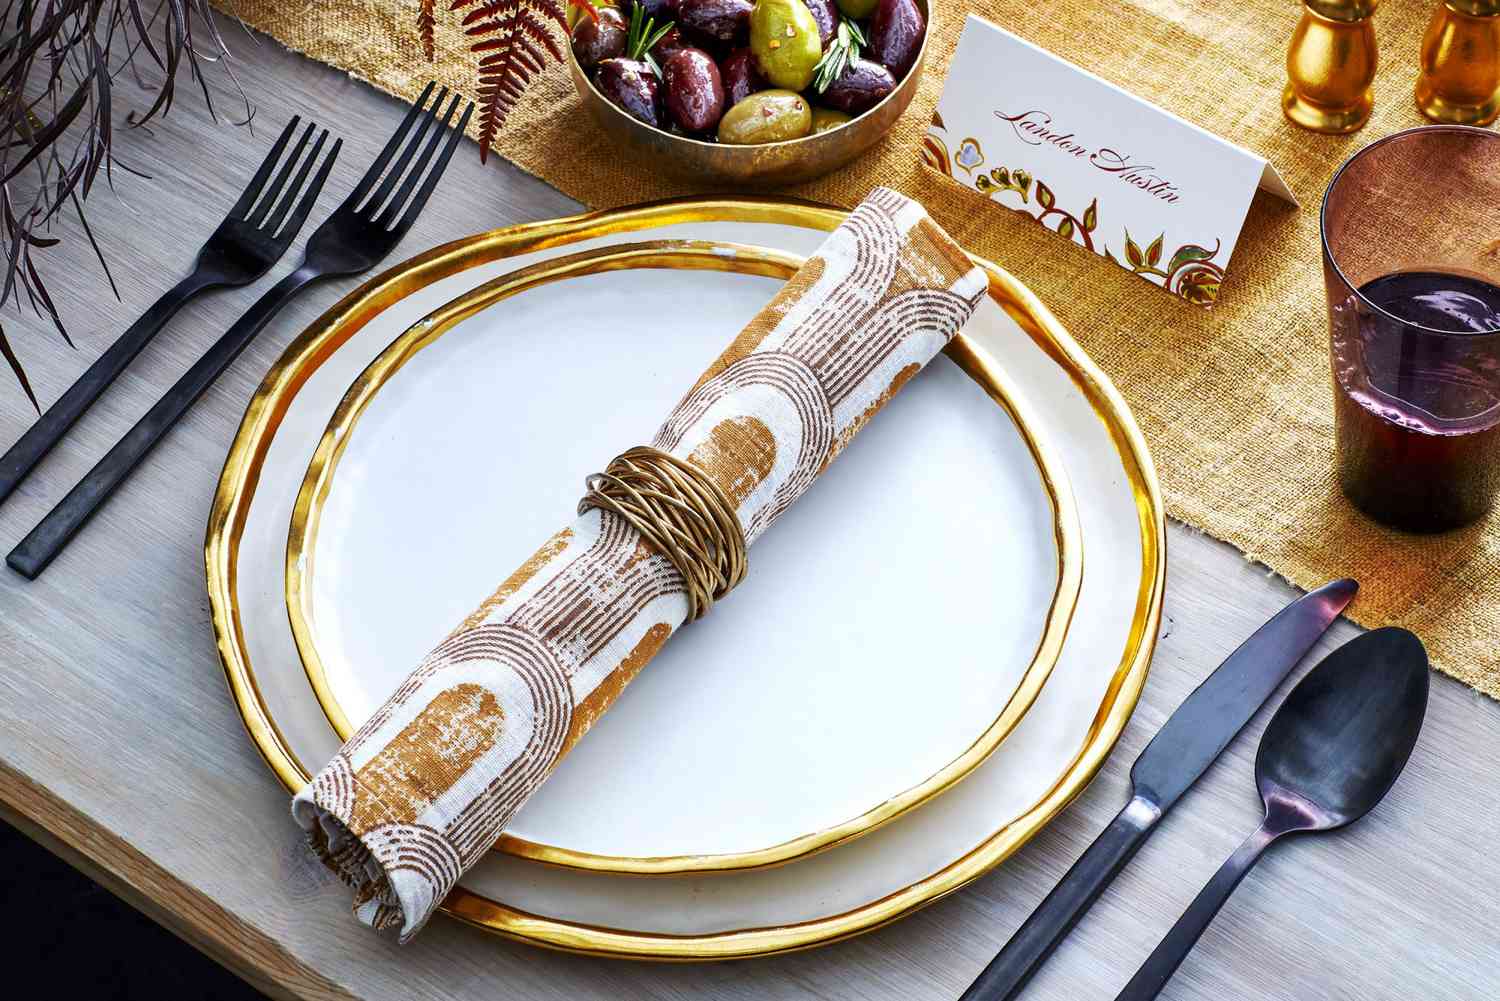 How To Arrange Place Settings For Silverware